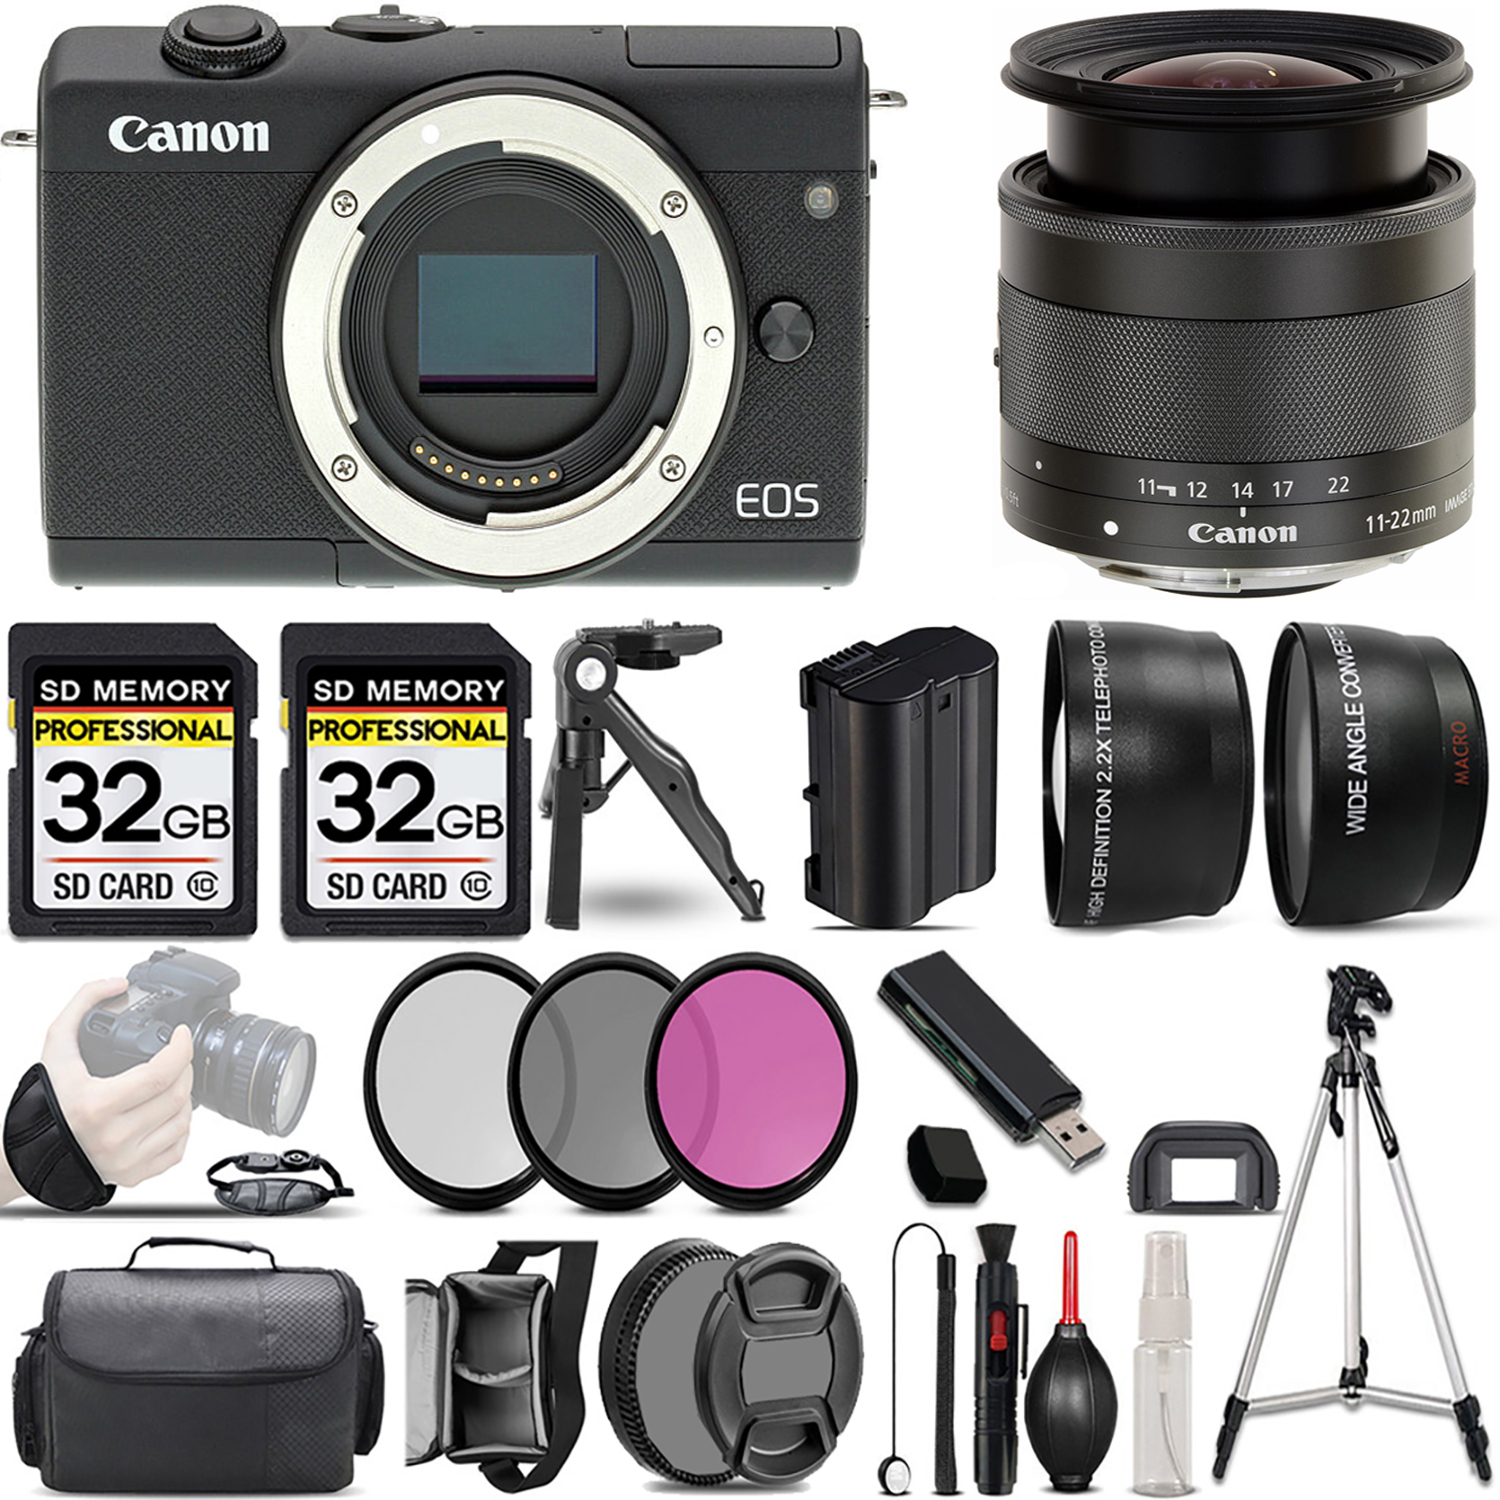 EOS M200 Camera (Black) + 11-22mm f/4-5.6 IS STM Lens + 3 Piece Filter Set + 64GB *FREE SHIPPING*